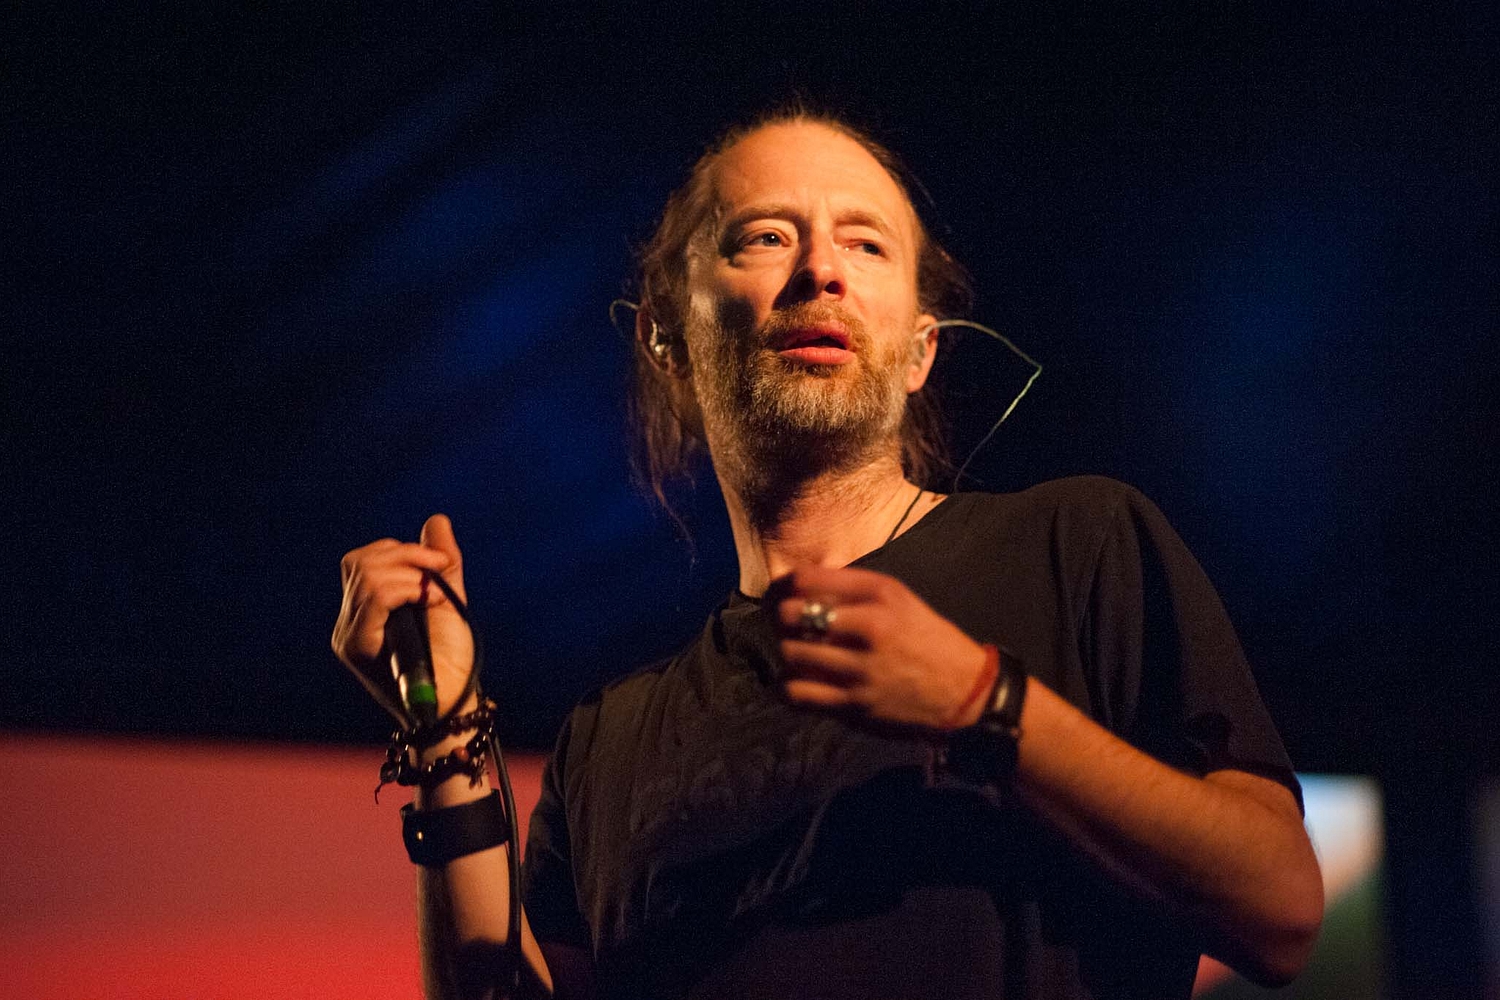 Thom Yorke to play NOS Alive 2019